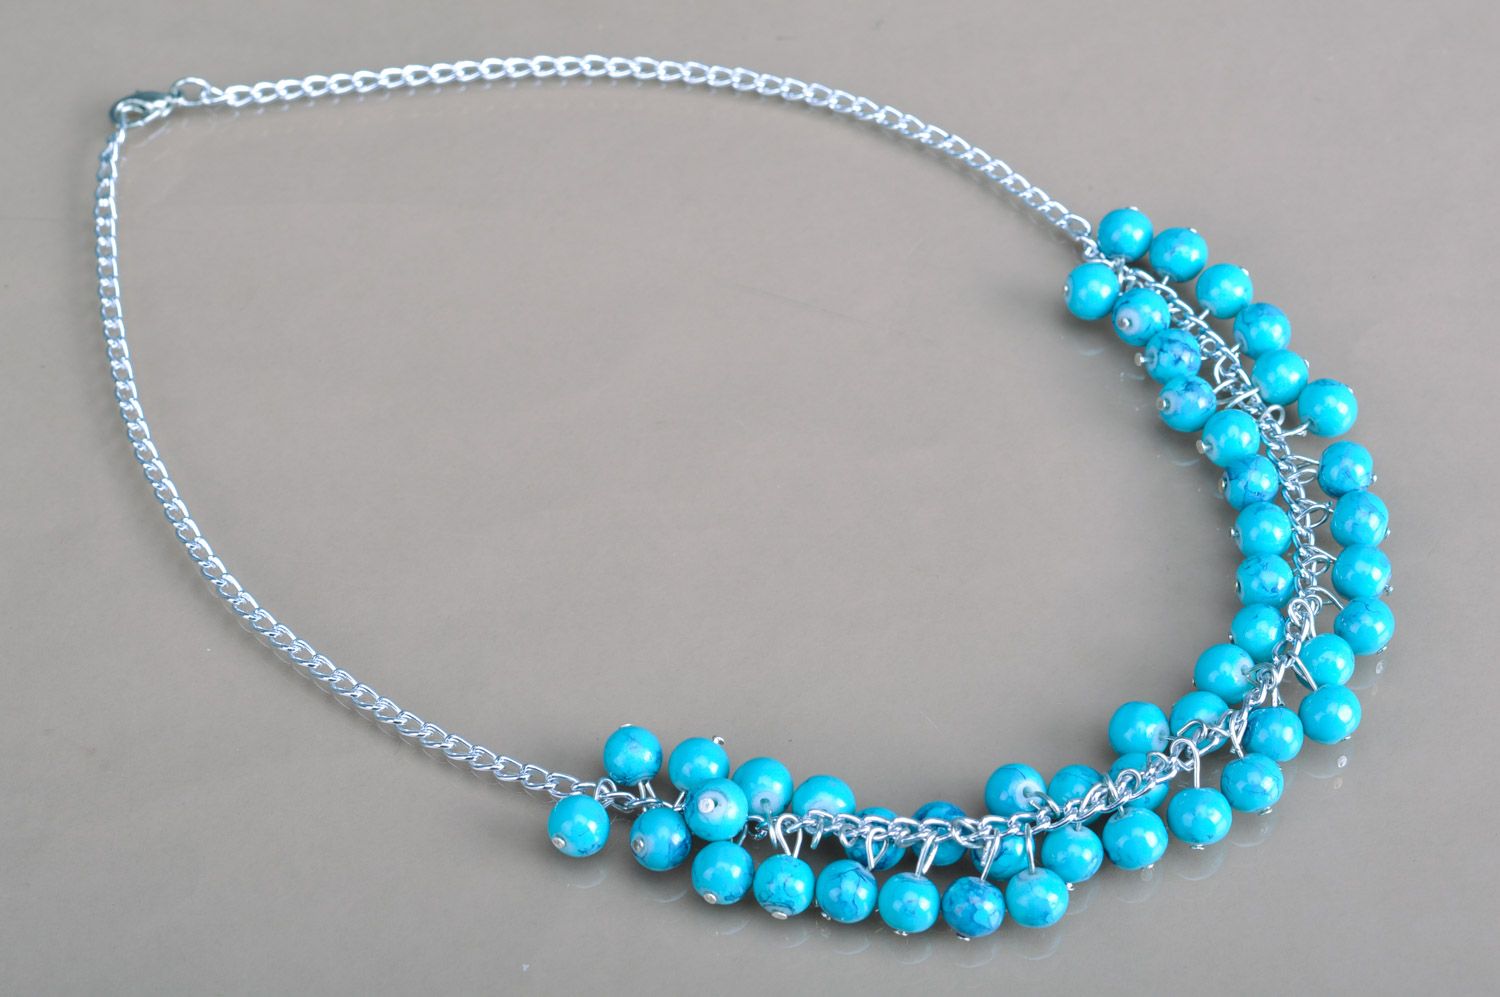 Handmade blue bead necklace with long metal chain photo 2